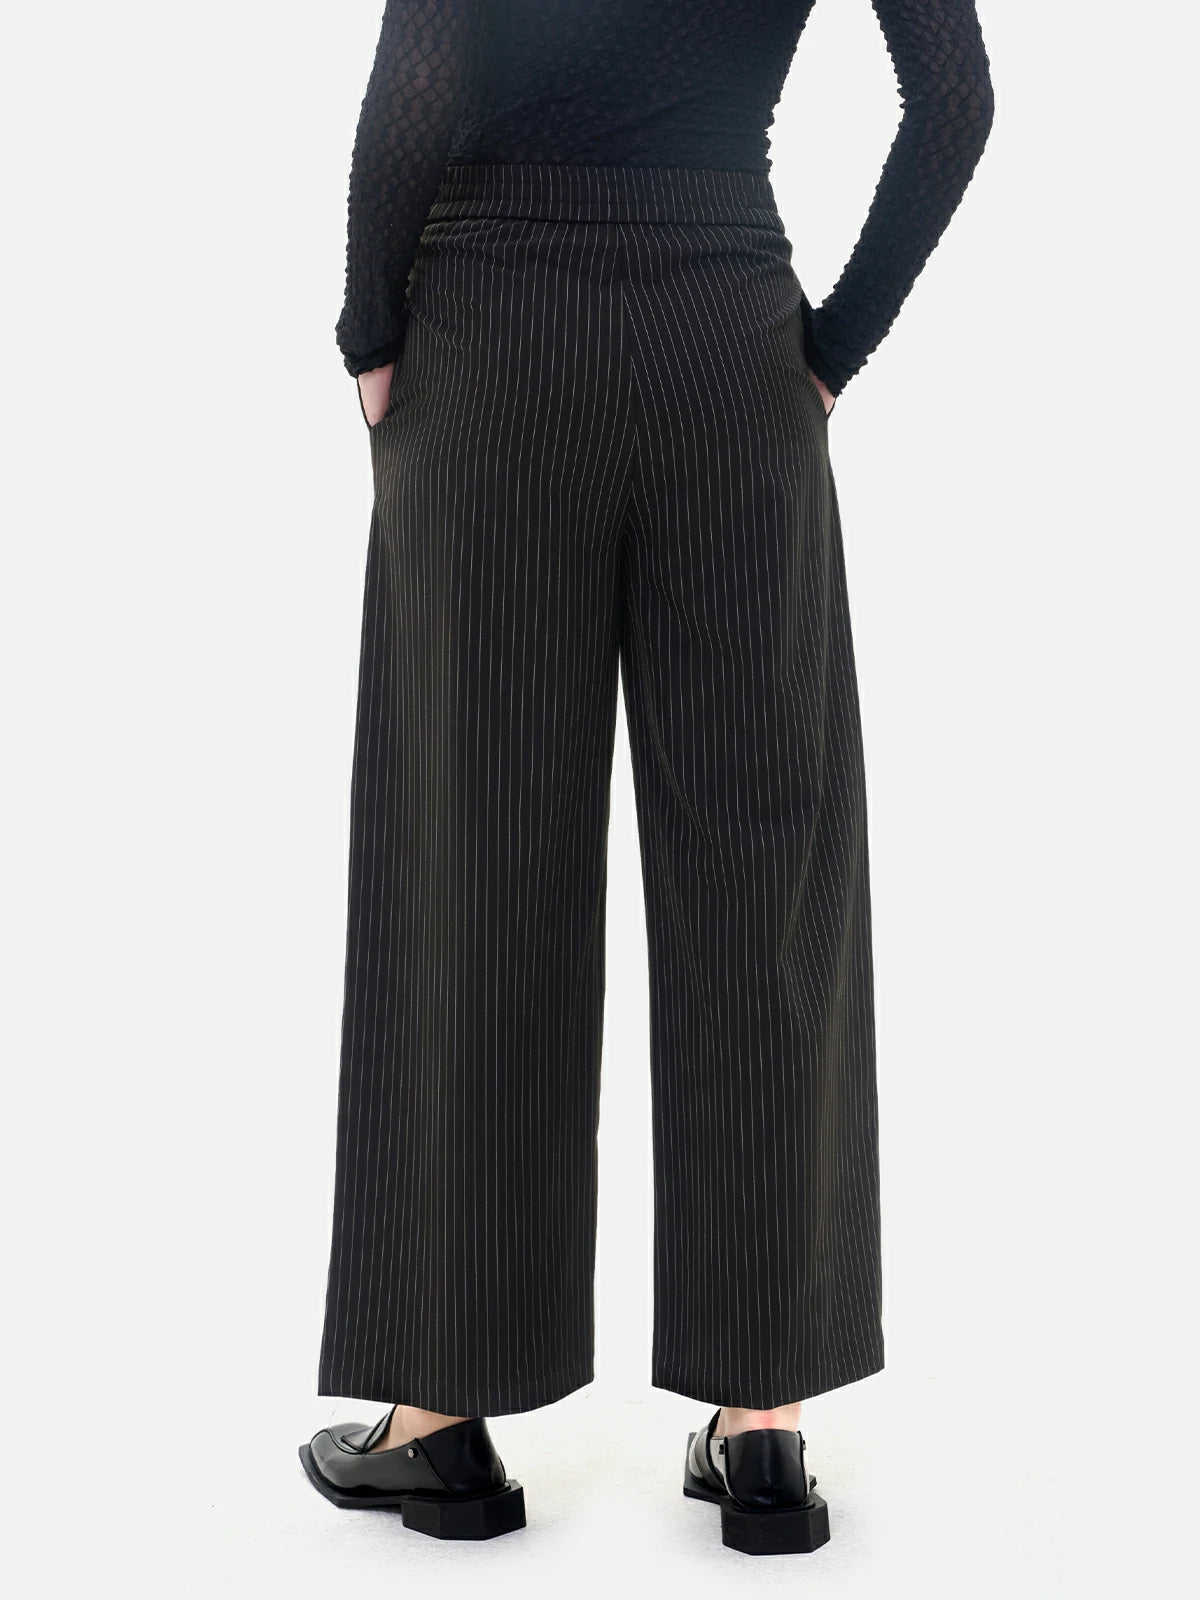 Transition seamlessly from office to casual settings with these wide-leg pants, boasting a classic vertical stripe design.